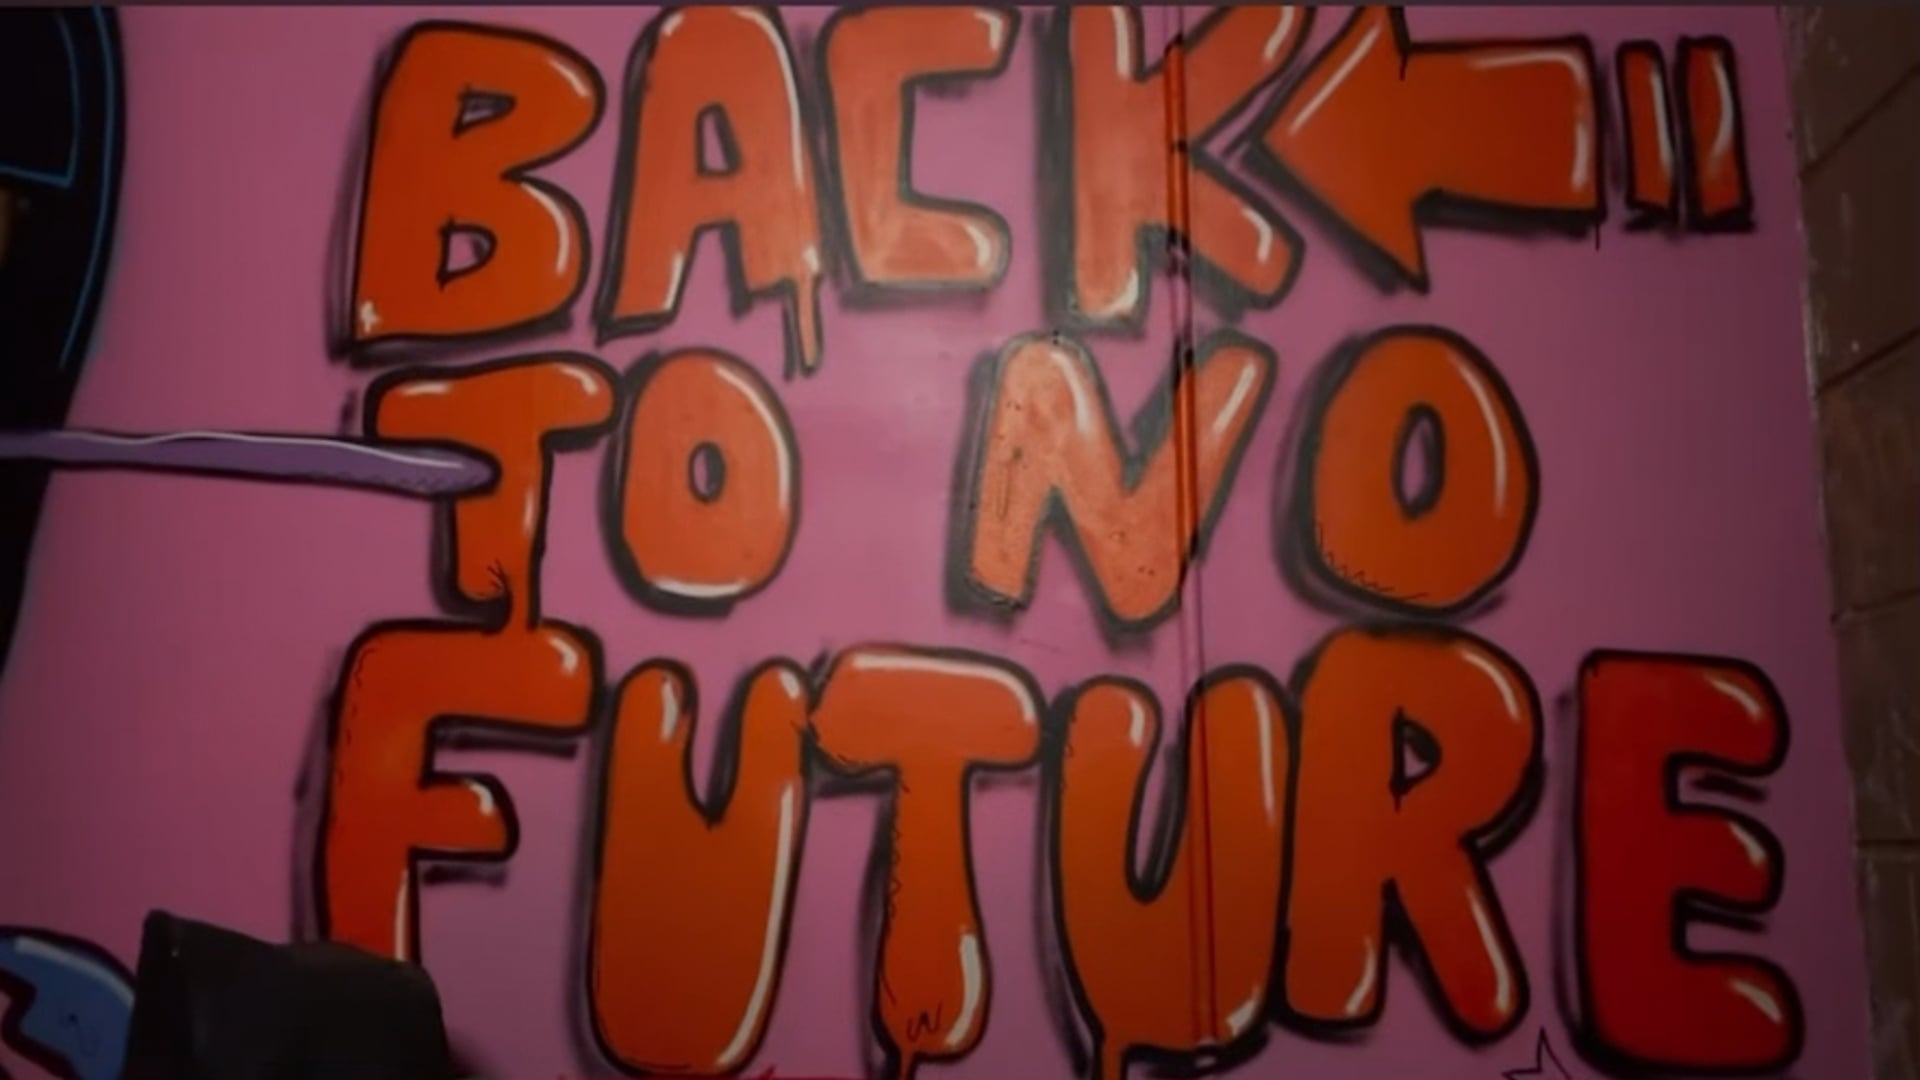 "Back to No Future" - Boy Witch